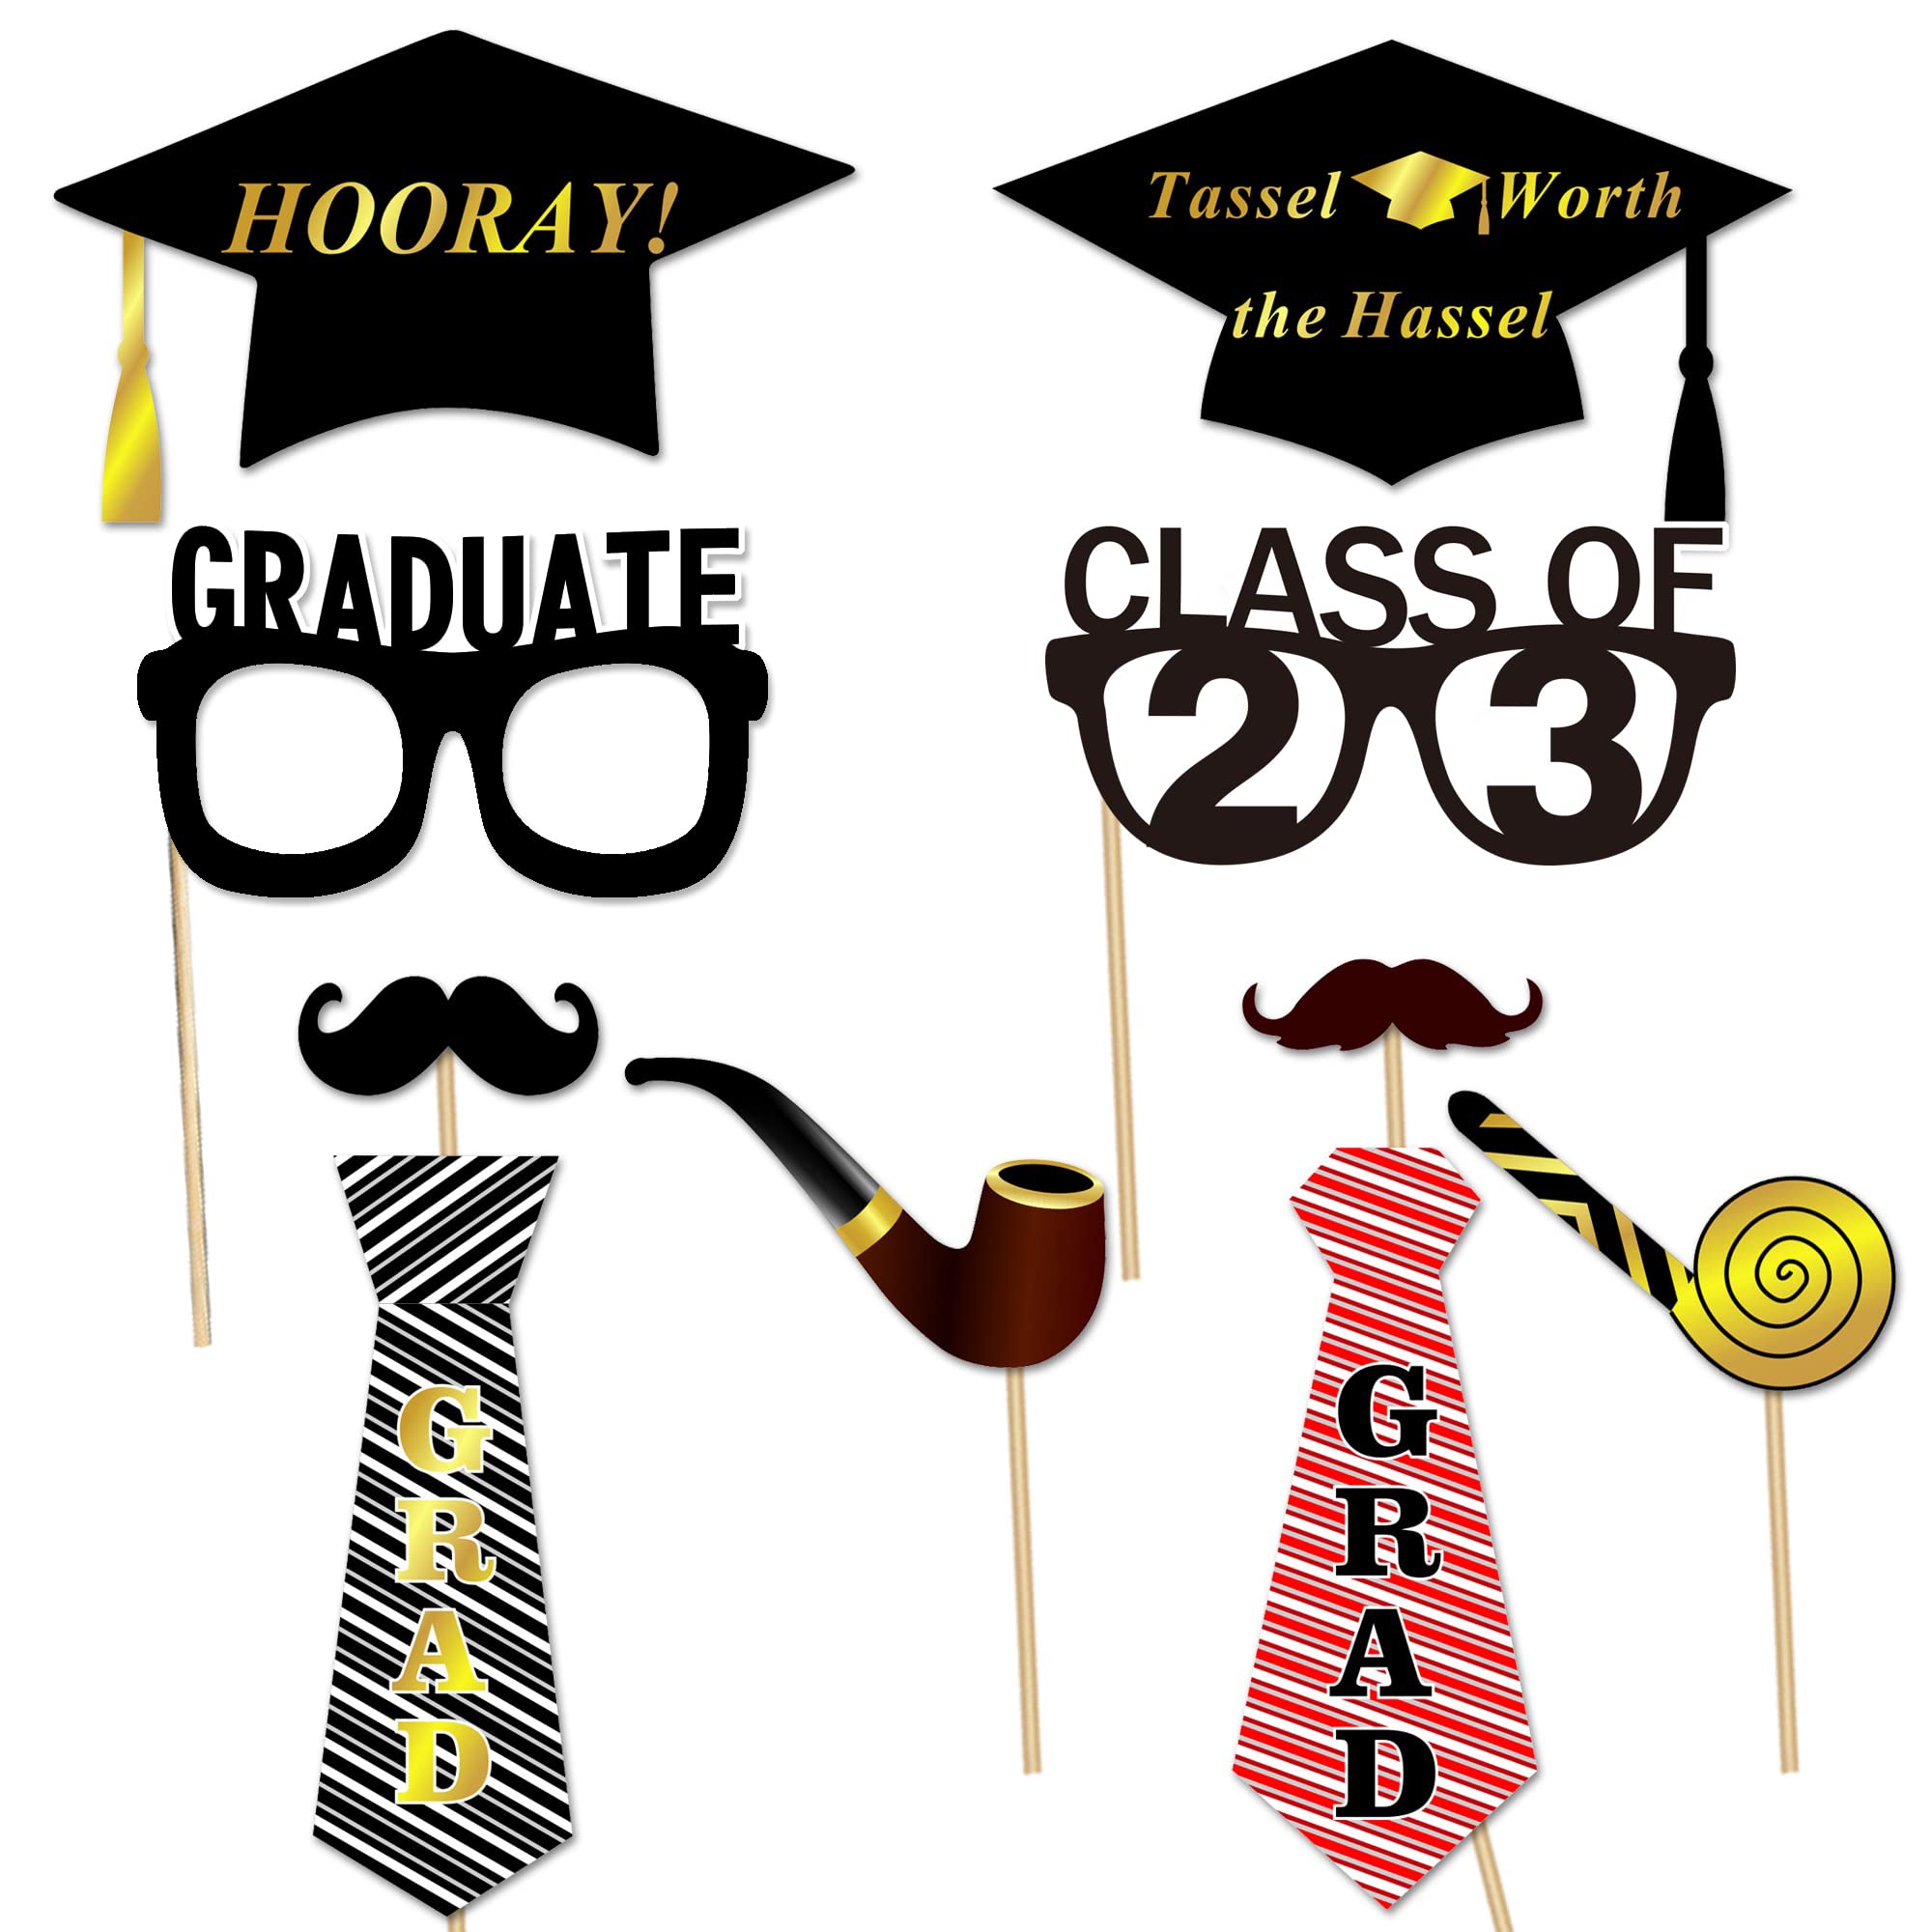 Graduation Photo Booth Props (50Count), Konsait Large Graduation Photo Props Class of 2023 Grad Decor with Sticks for Kids Boy Girl, Black and Gold, for Graduation Party Favors Supplies Decorations